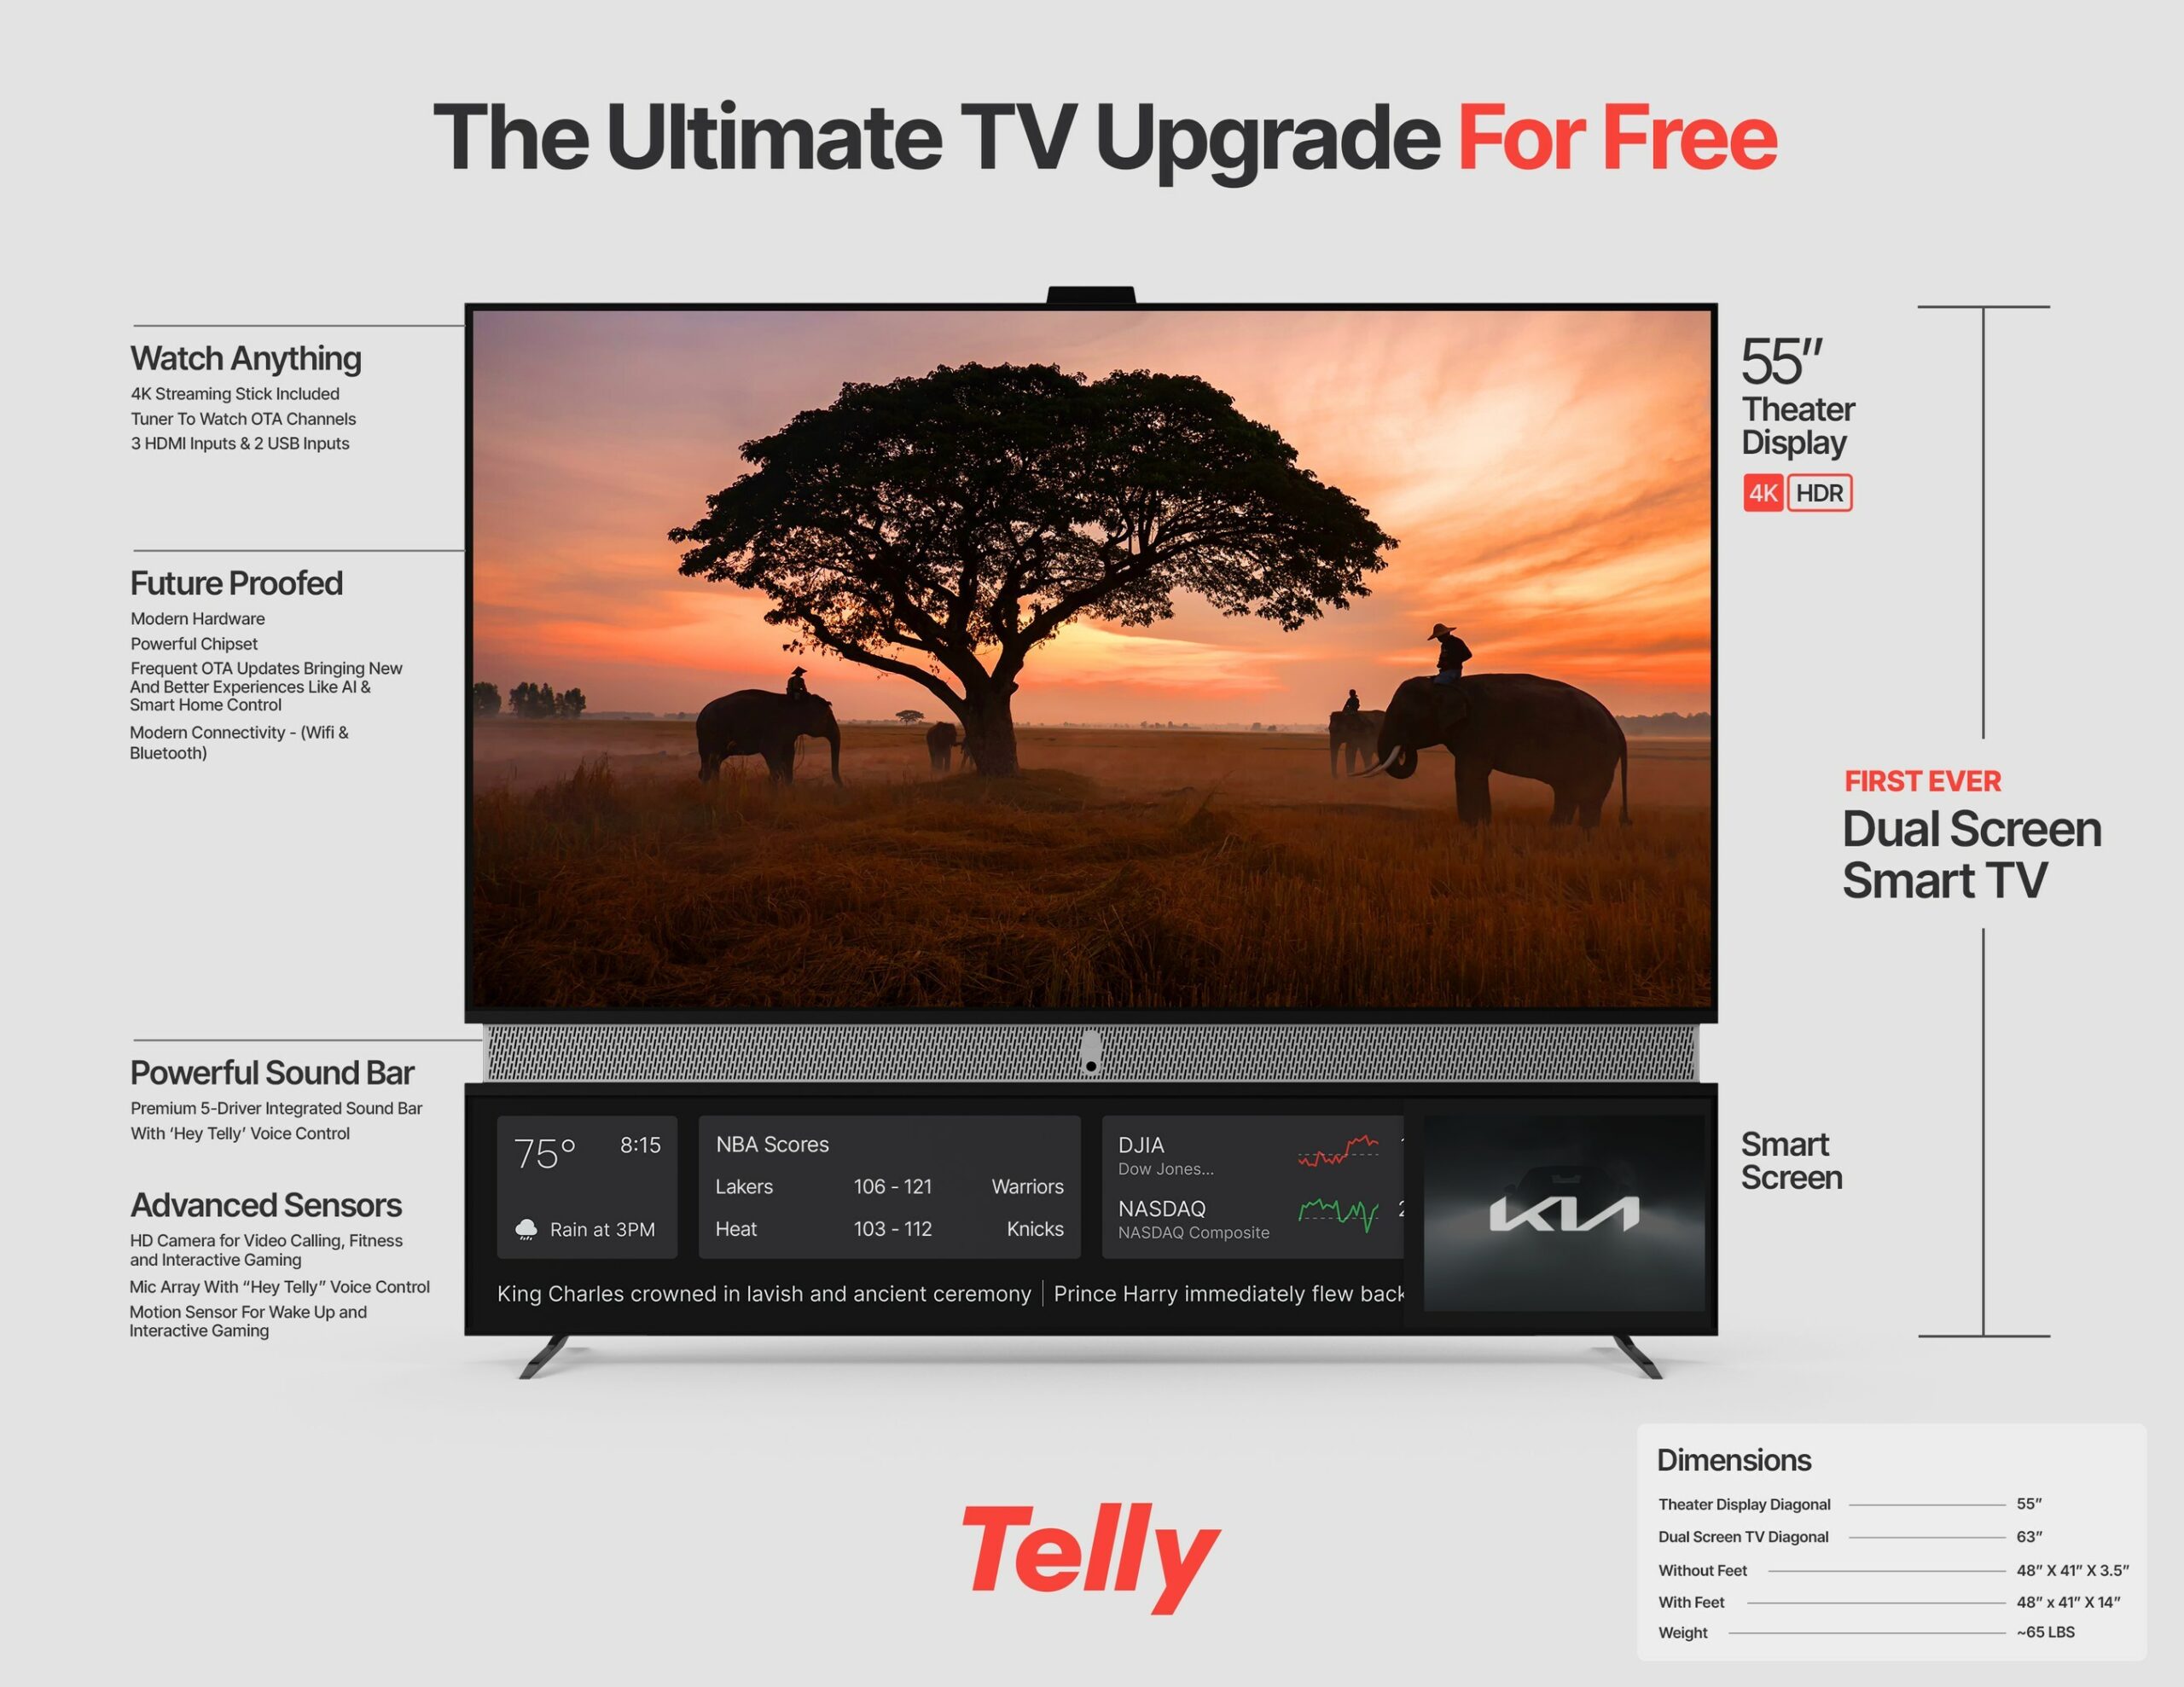 Diagram showing the features of the free Telly TV set and how it supports the startup's unique business model.